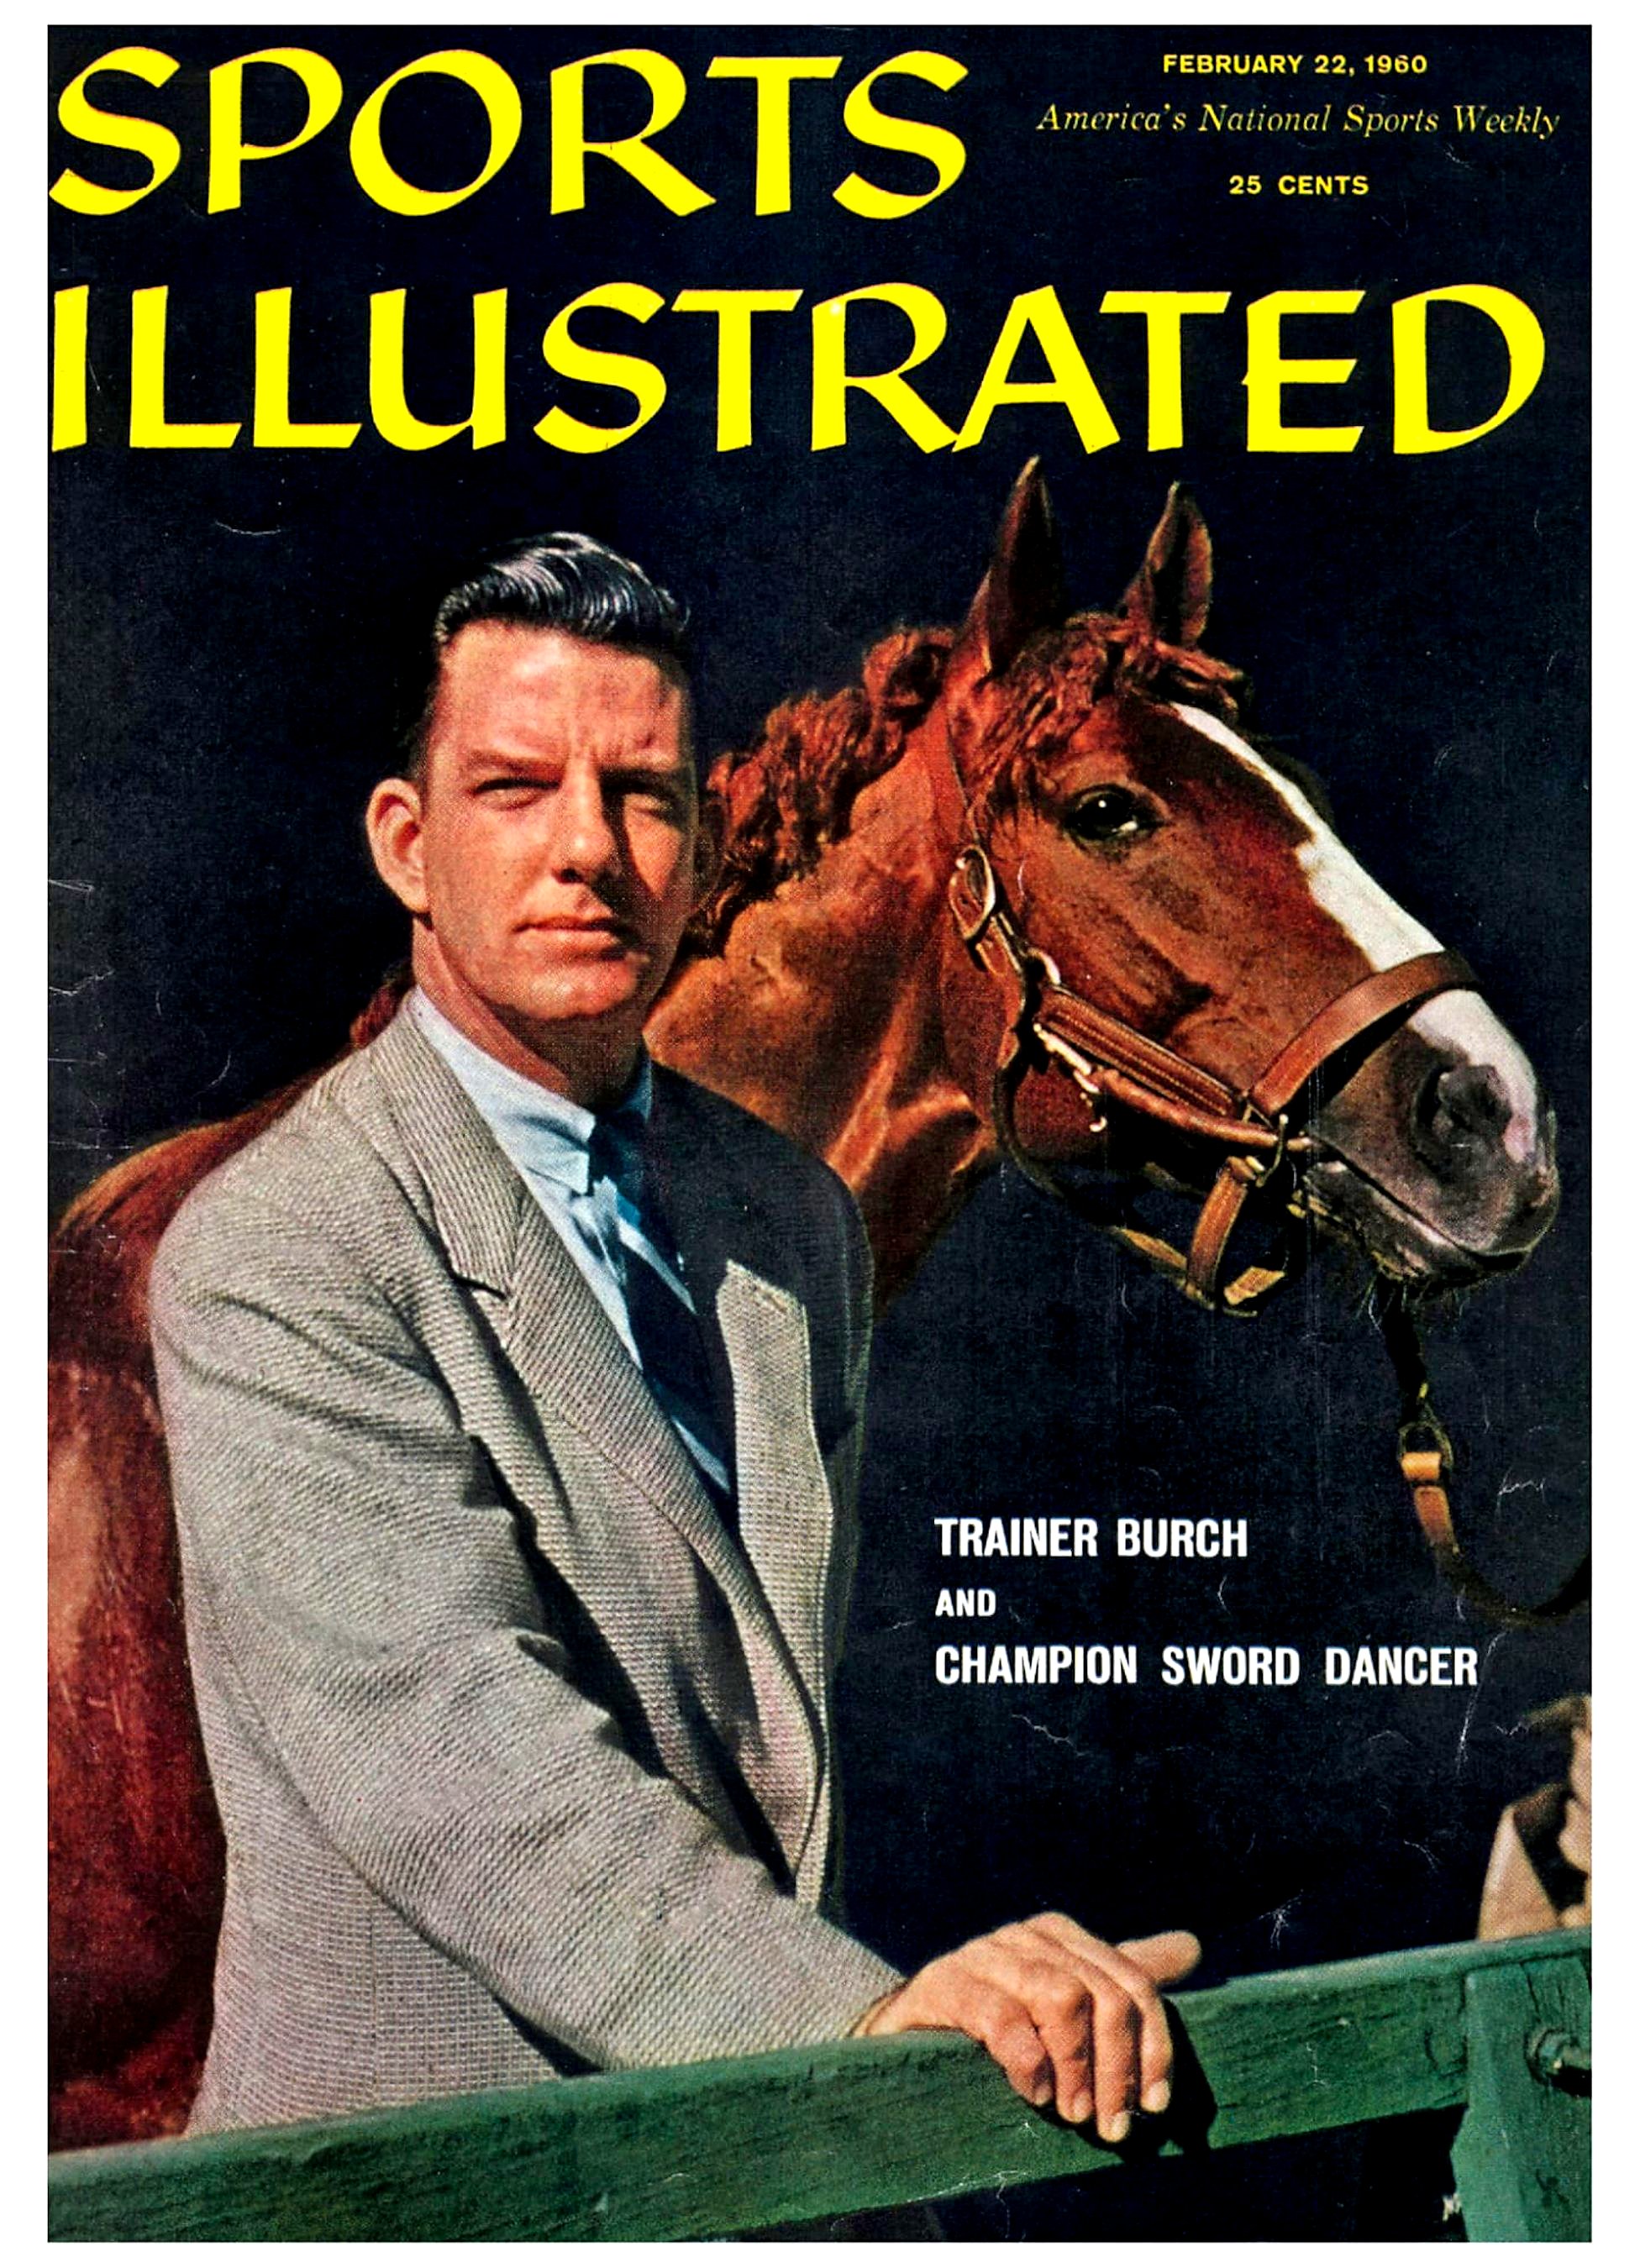 Elliott Burch and Sword Dancer on the cover of "Sports Illustrated" in 1960 (Sports Illustrated)